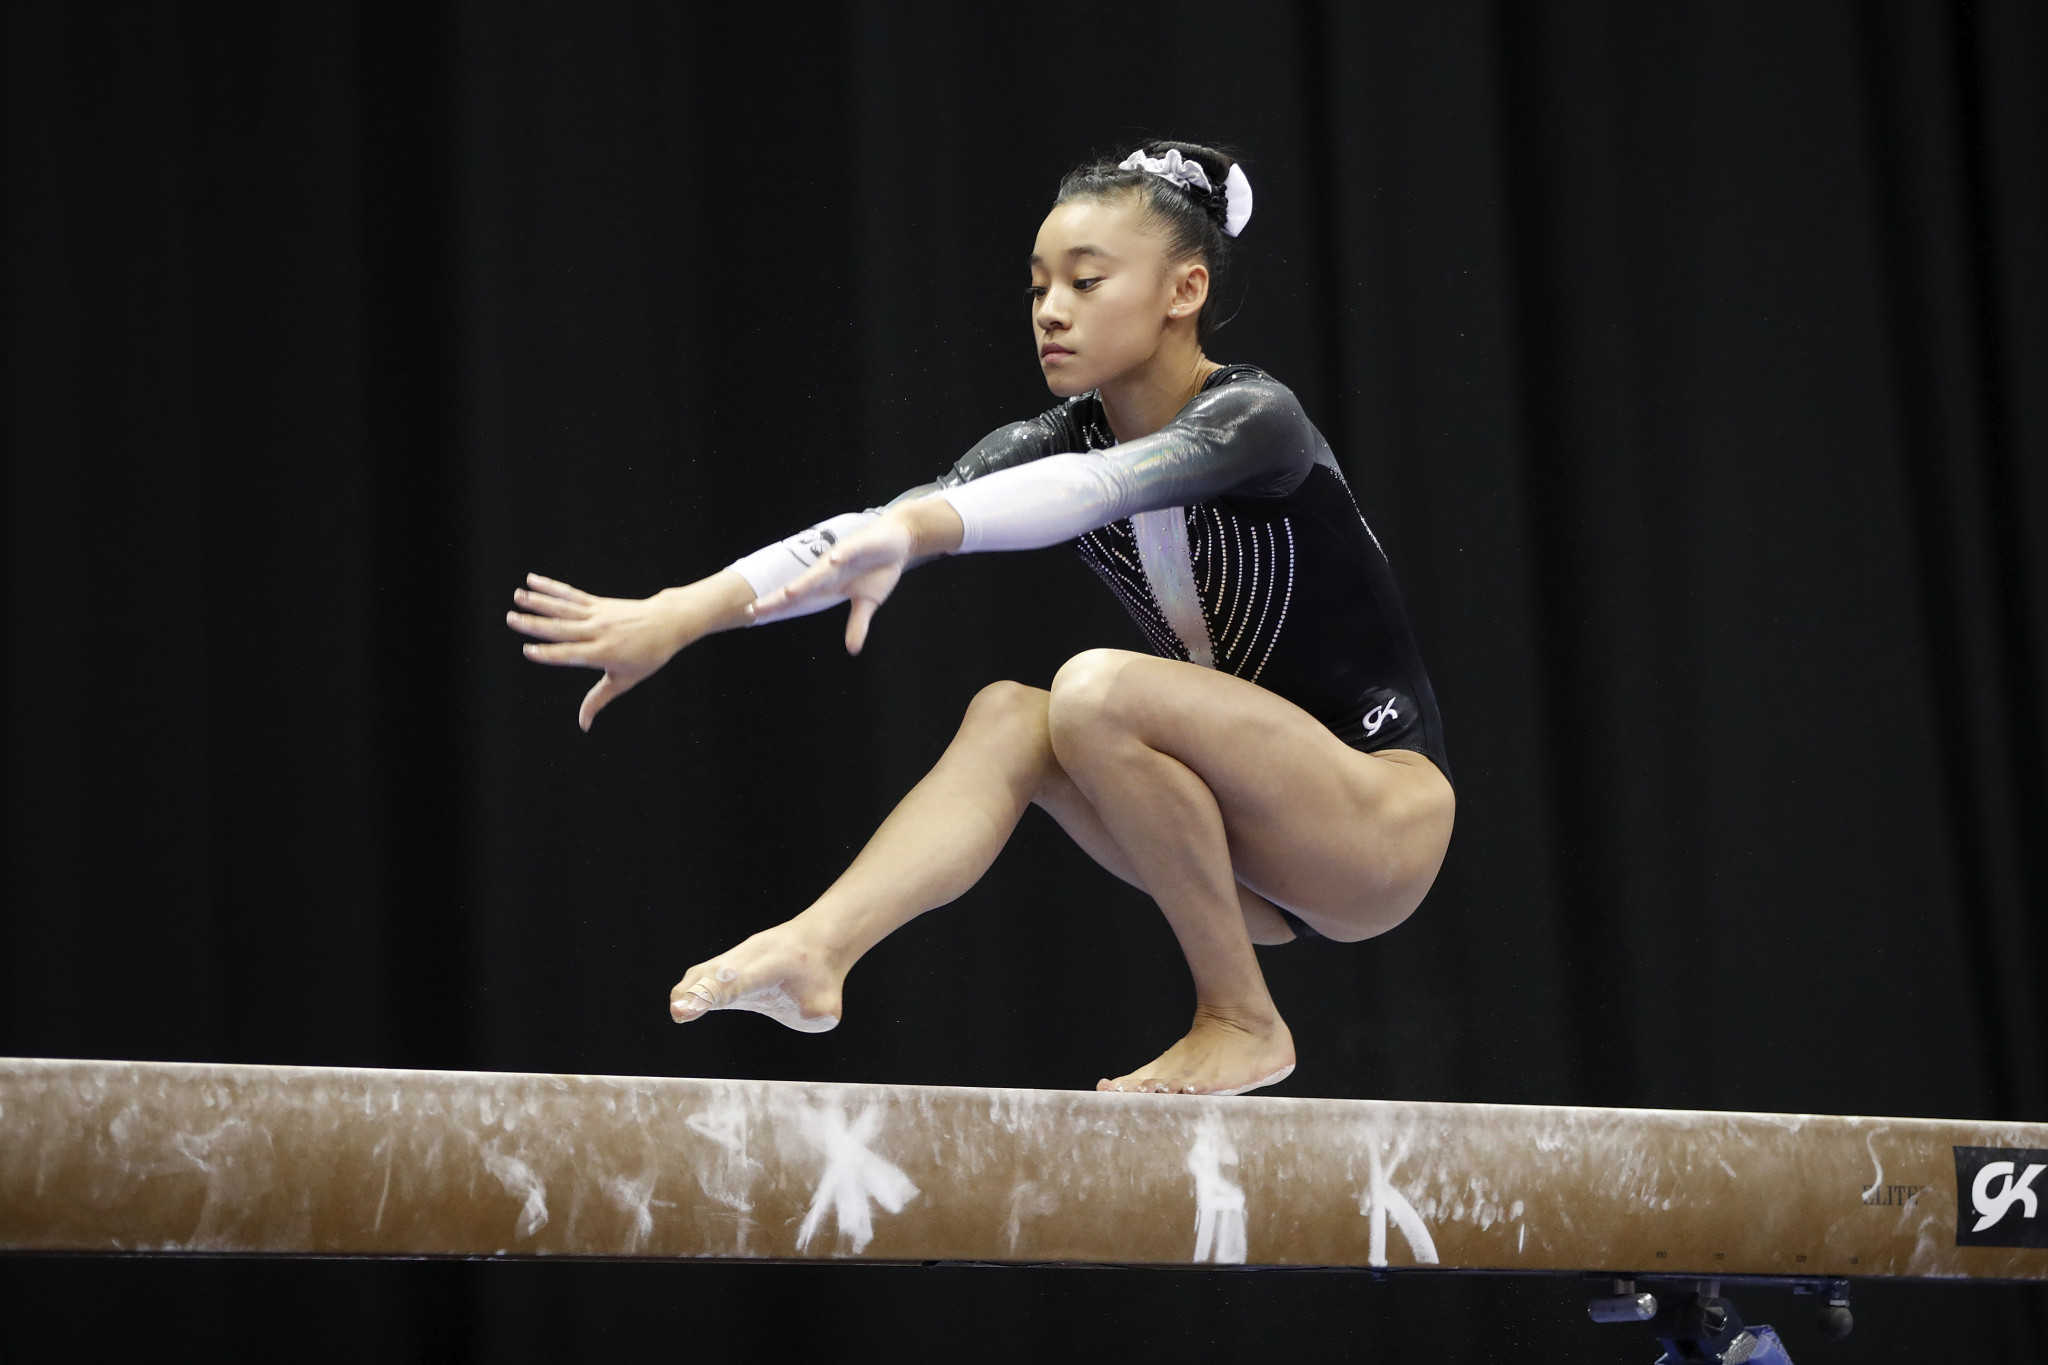 American teenager Leanne Wong produced an impressive display to win the women's event in Greensboro ©Getty Images